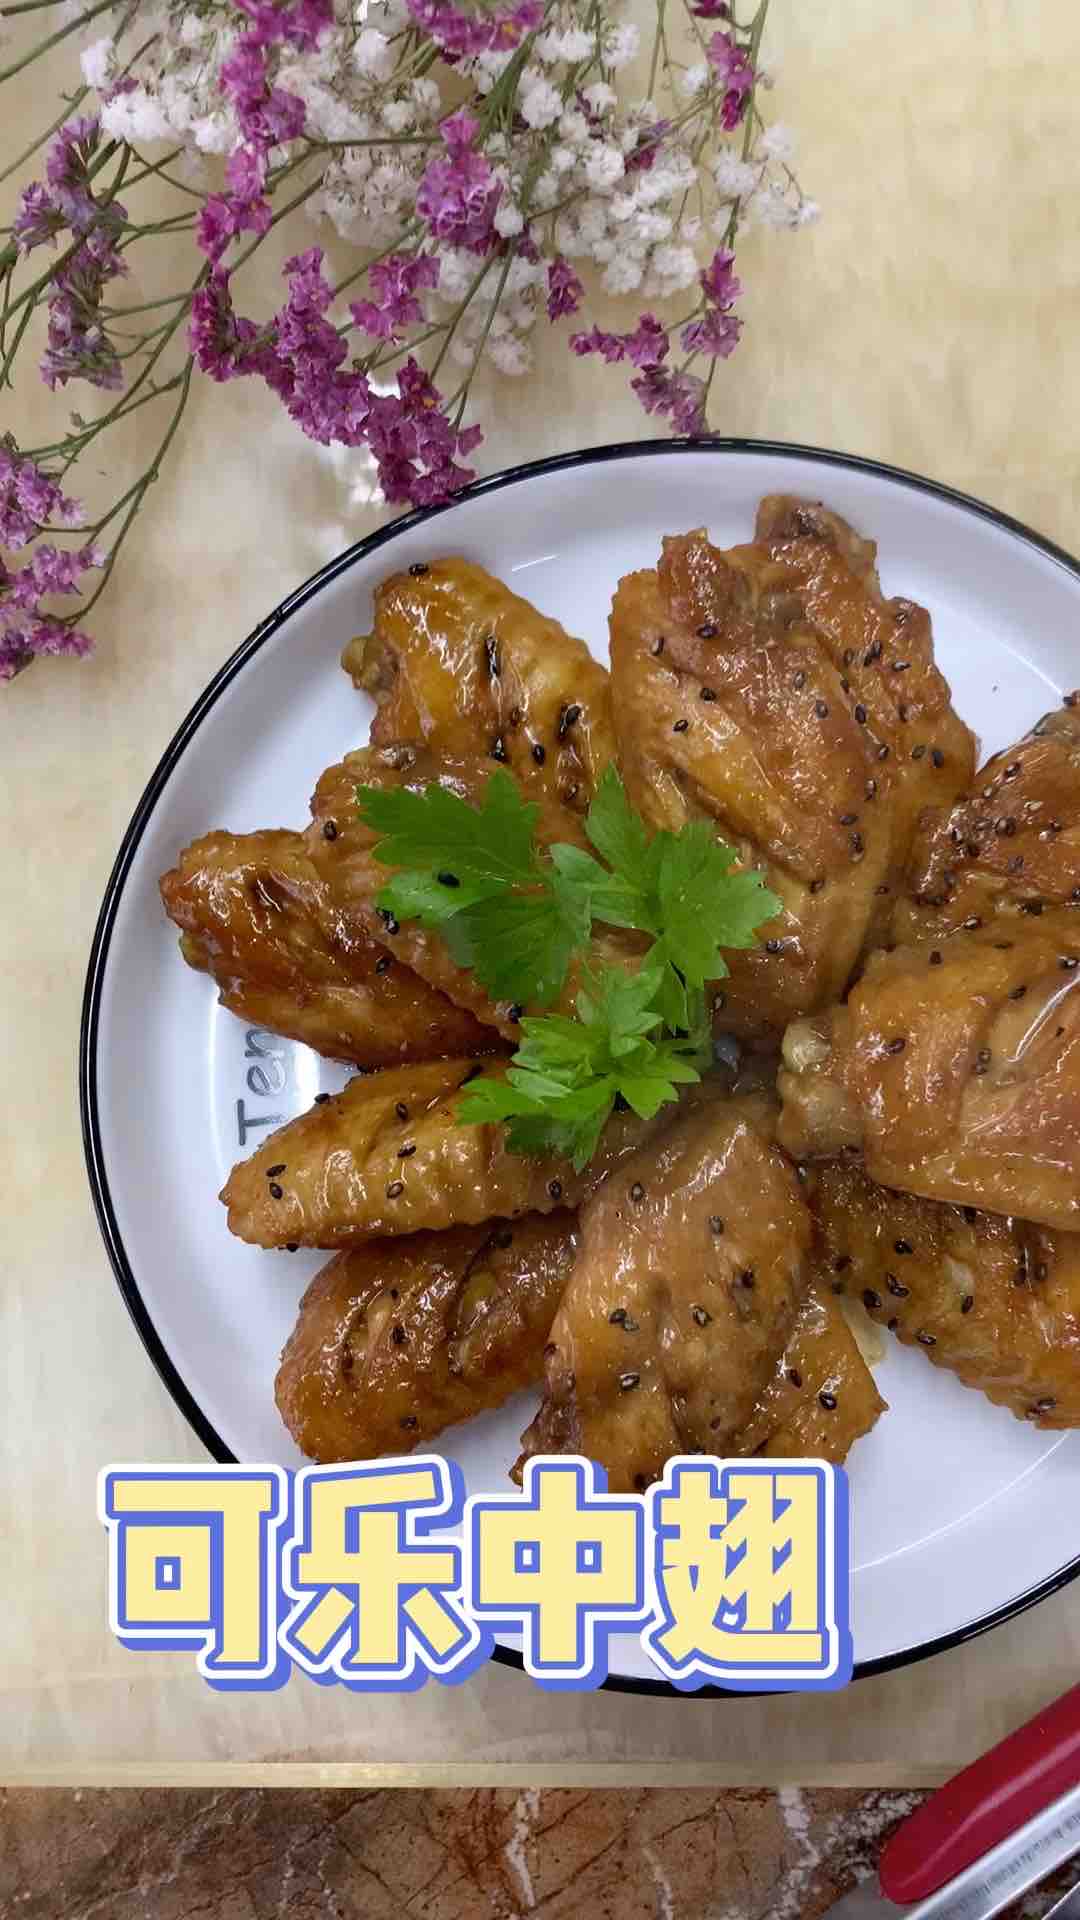 Ginger Coke Middle Wing recipe